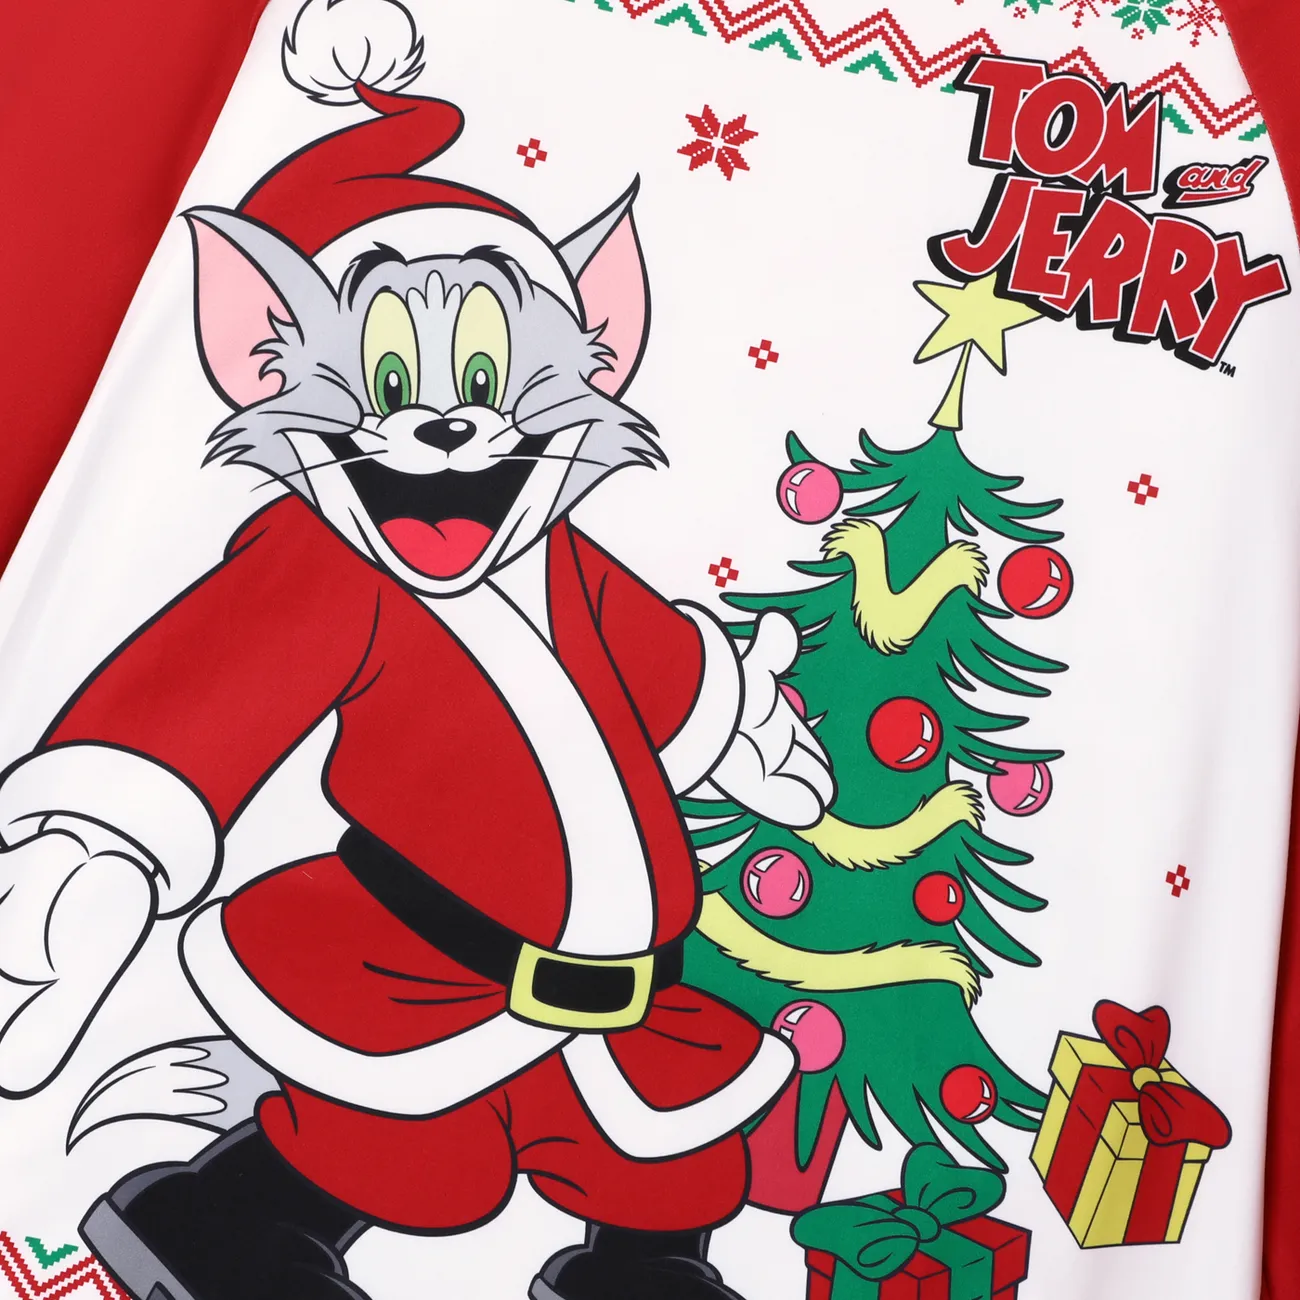 Tom and Jerry Weihnachten Familien-Looks Langärmelig Familien-Outfits Pyjamas (Flame Resistant) rot big image 1